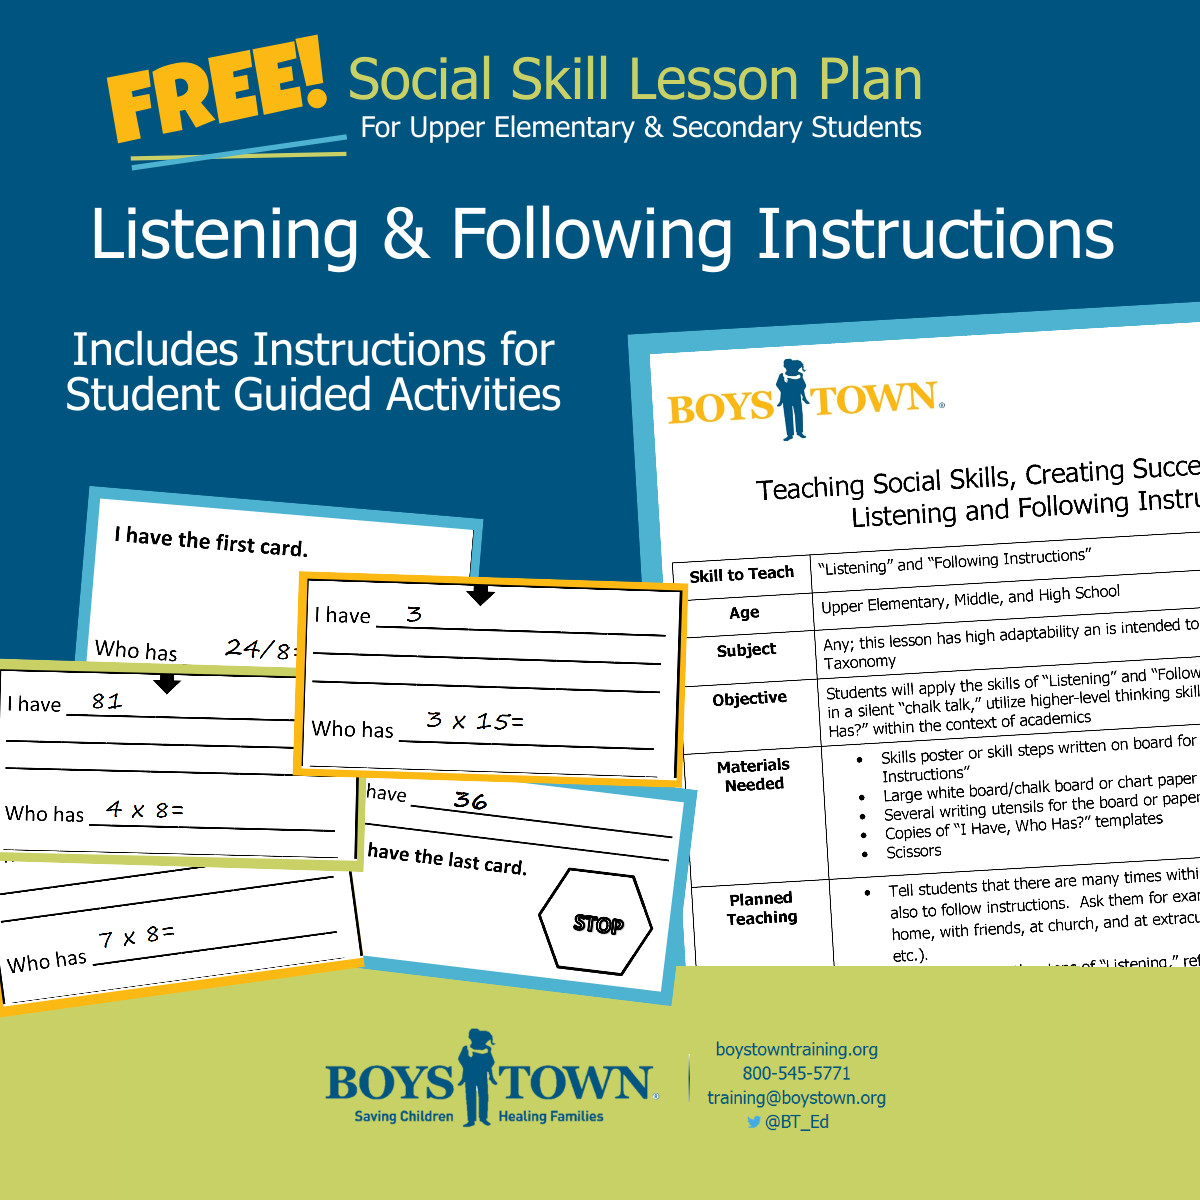 Social Skills Lesson Plans Let Students Guide the Learning with This Free Lesson